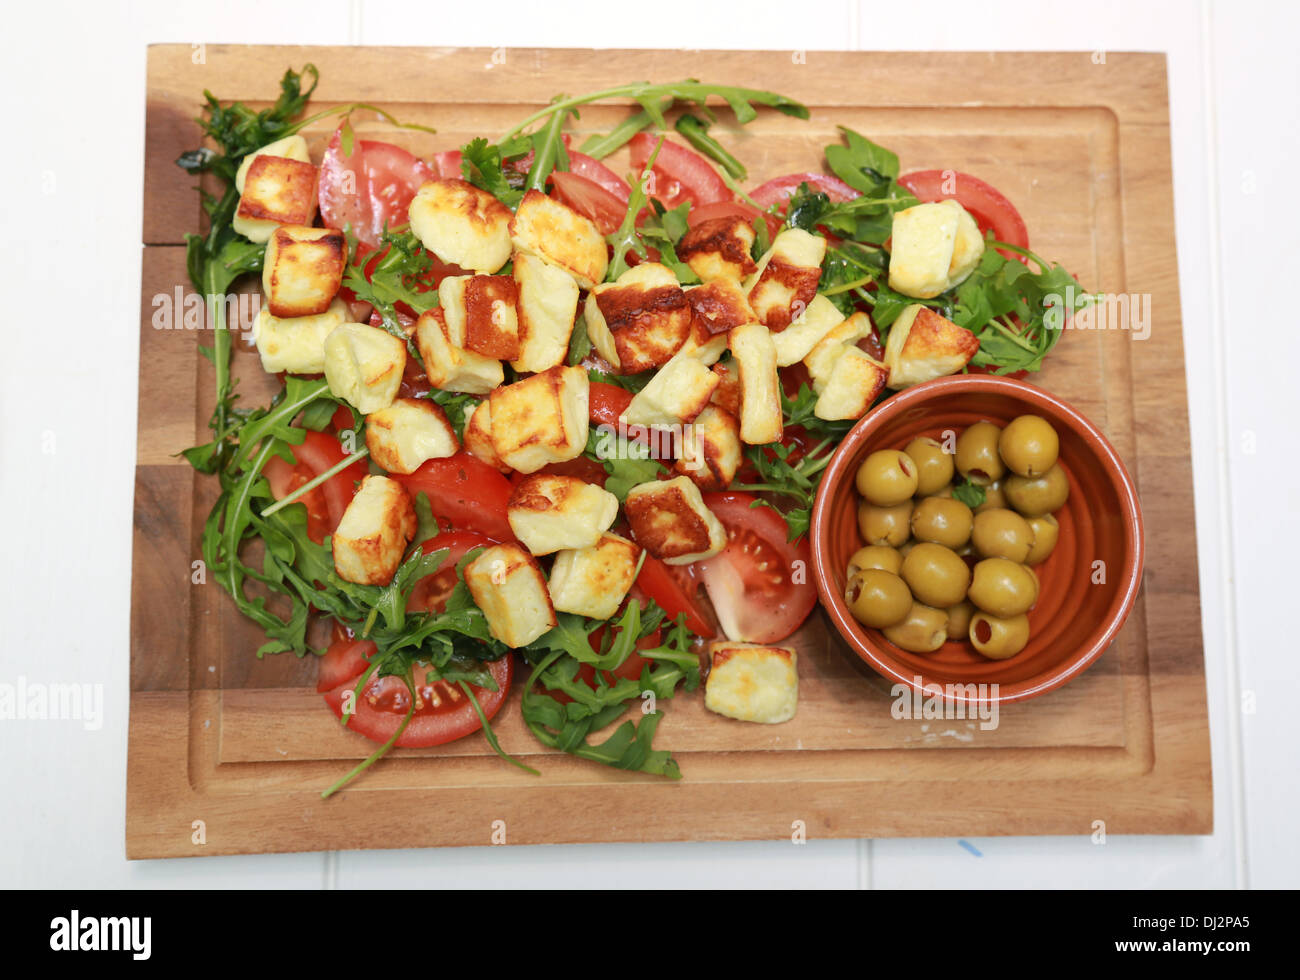 Halloumi salad and green olives on a wooden board. Stock Photo